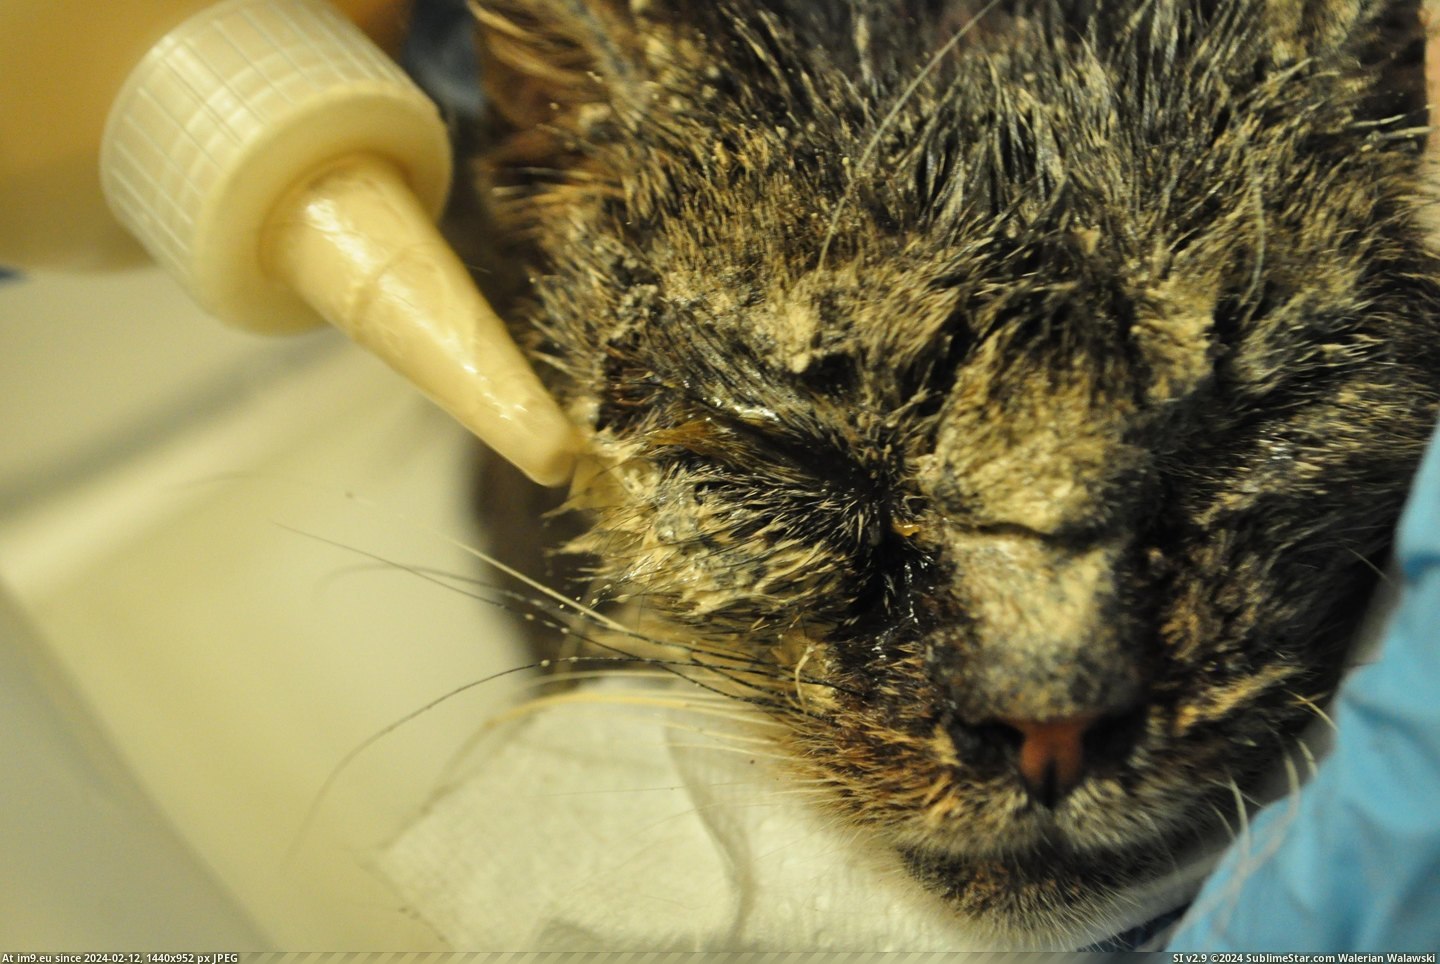 #Cats #Cat #Life #Helped #Dying #Blind #Starved #Kitten #Stray #Save [Cats] Mr. Cat - The Dying, Starved, and Blind Stray Kitten we found, and how Reddit helped save his life. 1 Pic. (Bild von album My r/CATS favs))